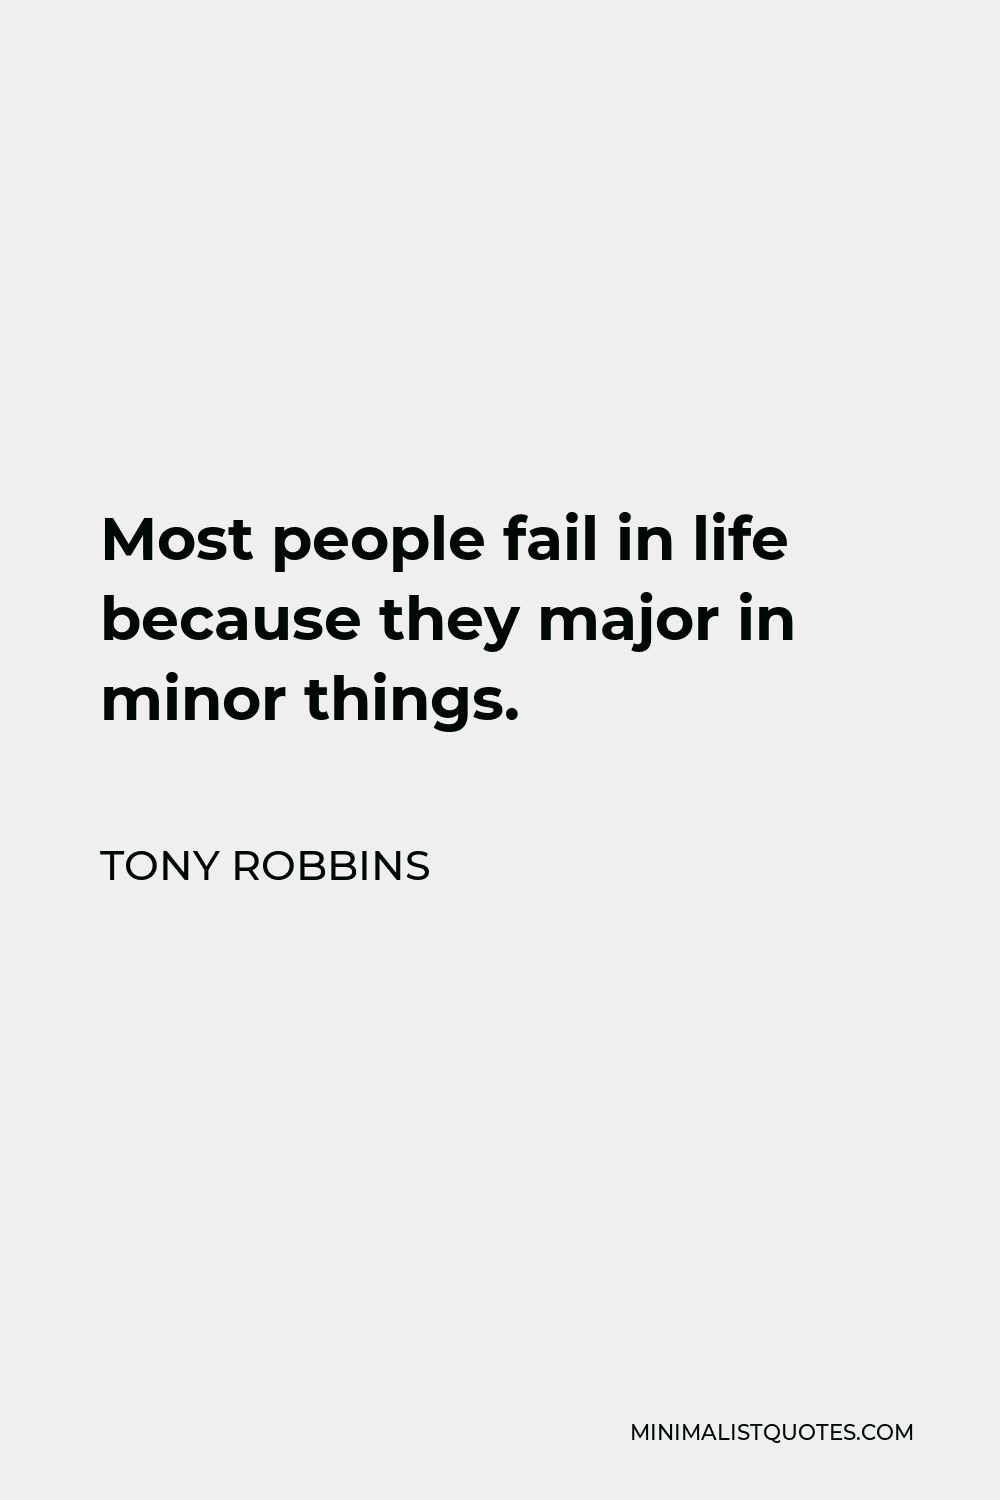 Tony Robbins Quote - Most people fail in life because they major in minor things.